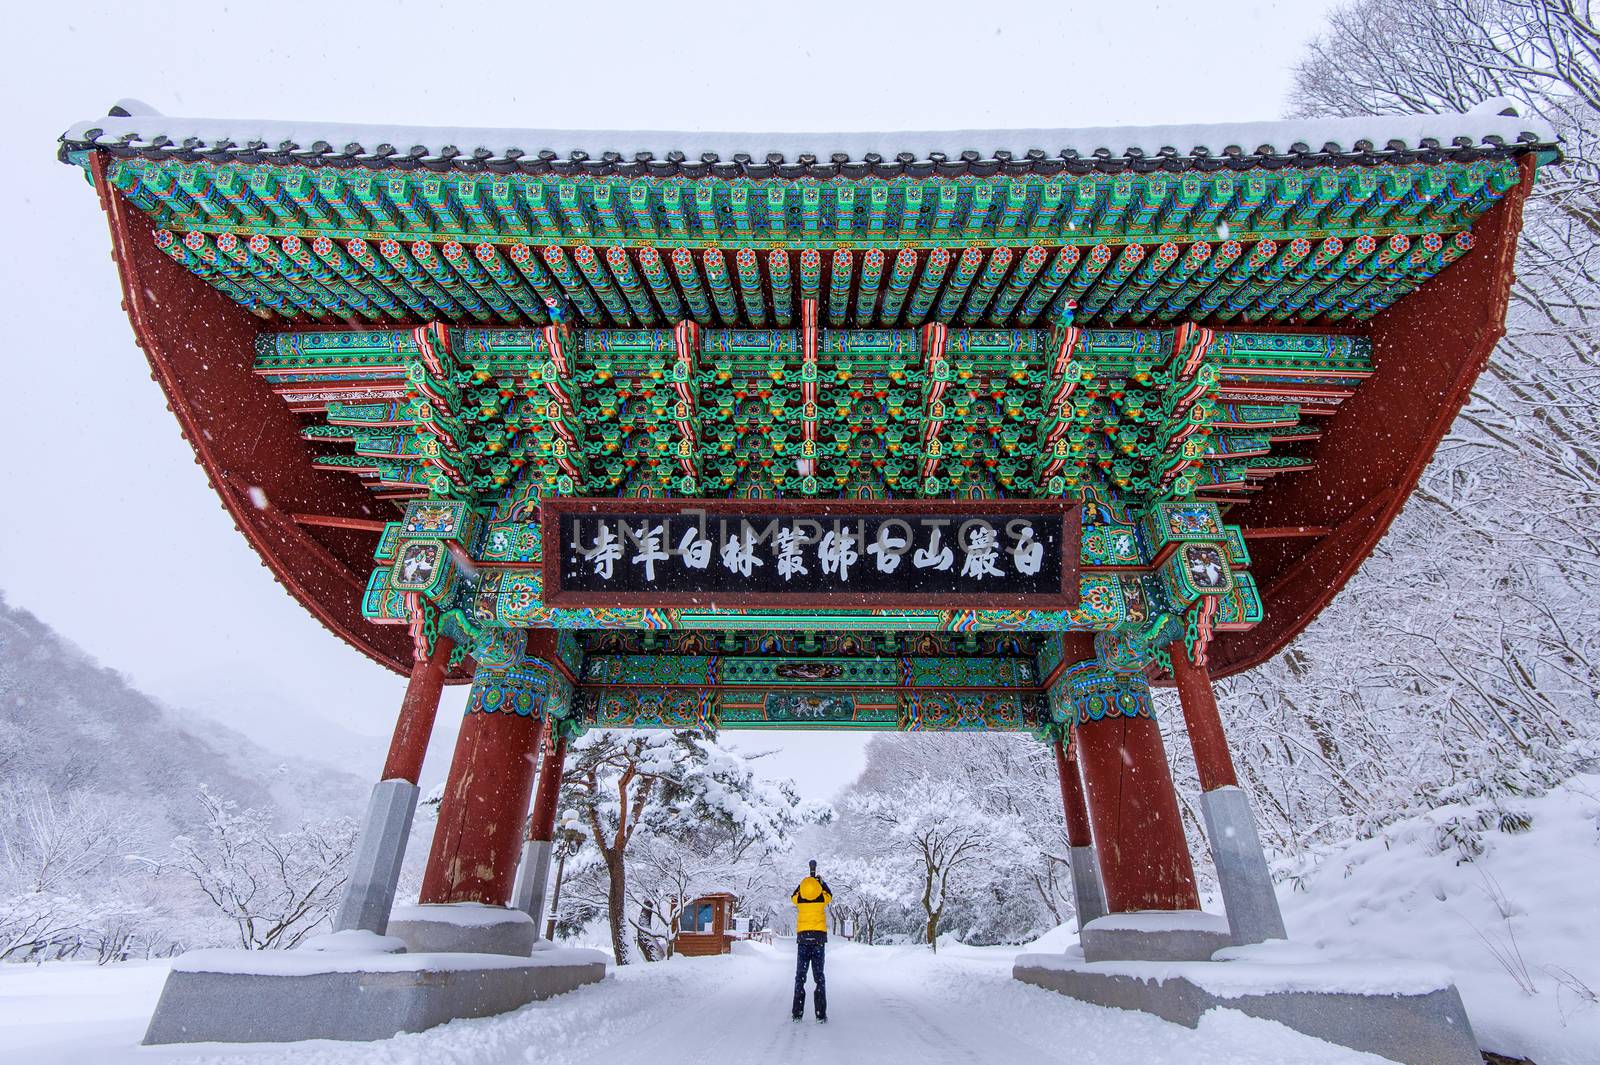 Professional photographer takes photos with camera at gate of Baekyangsa Temple and falling snow, Naejangsan Mountain in winter,South Korea.Winter landscape.